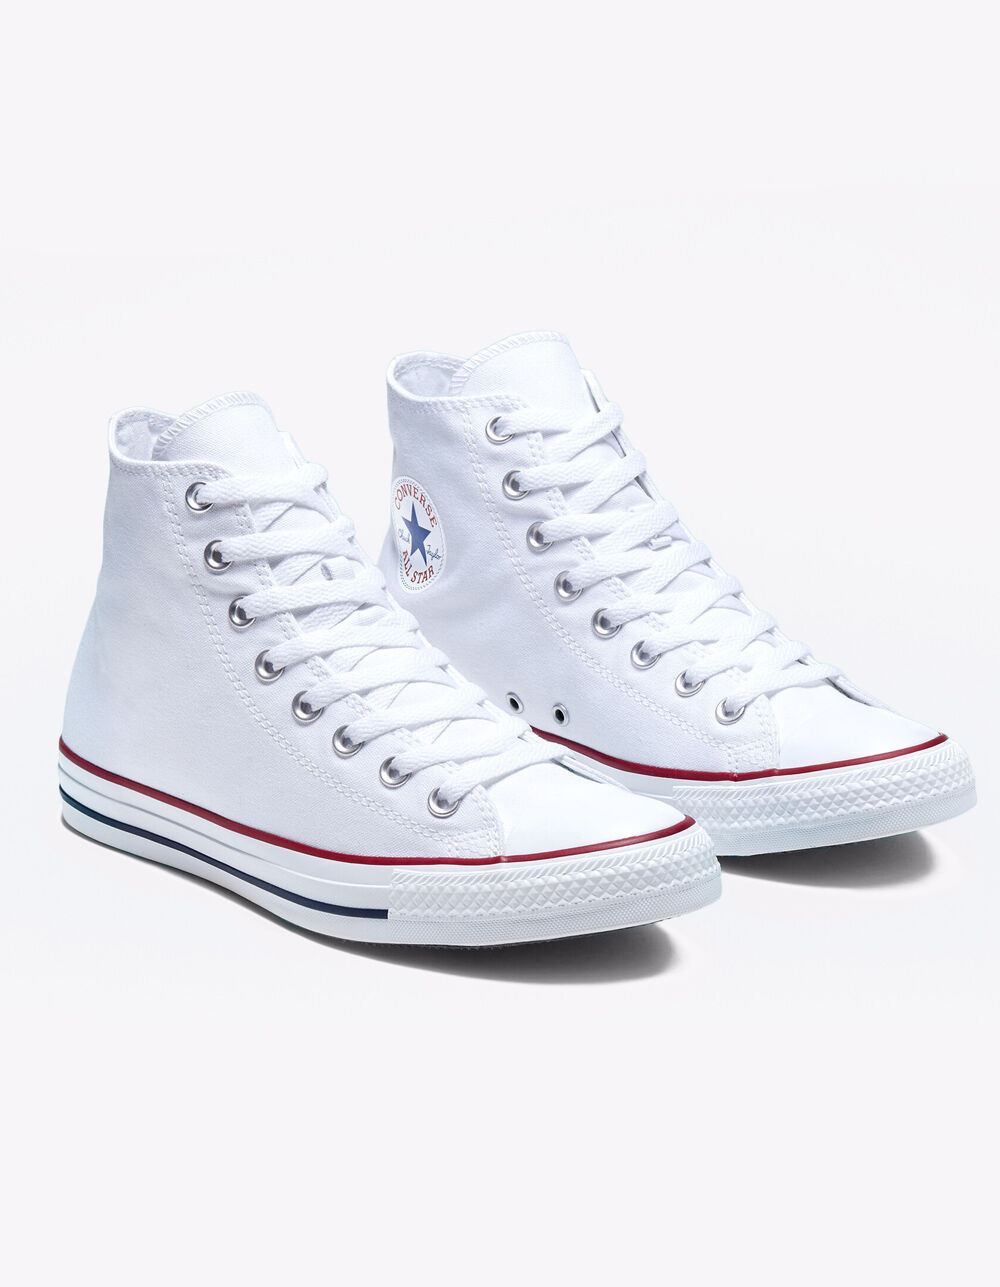 White High Top Shoes.